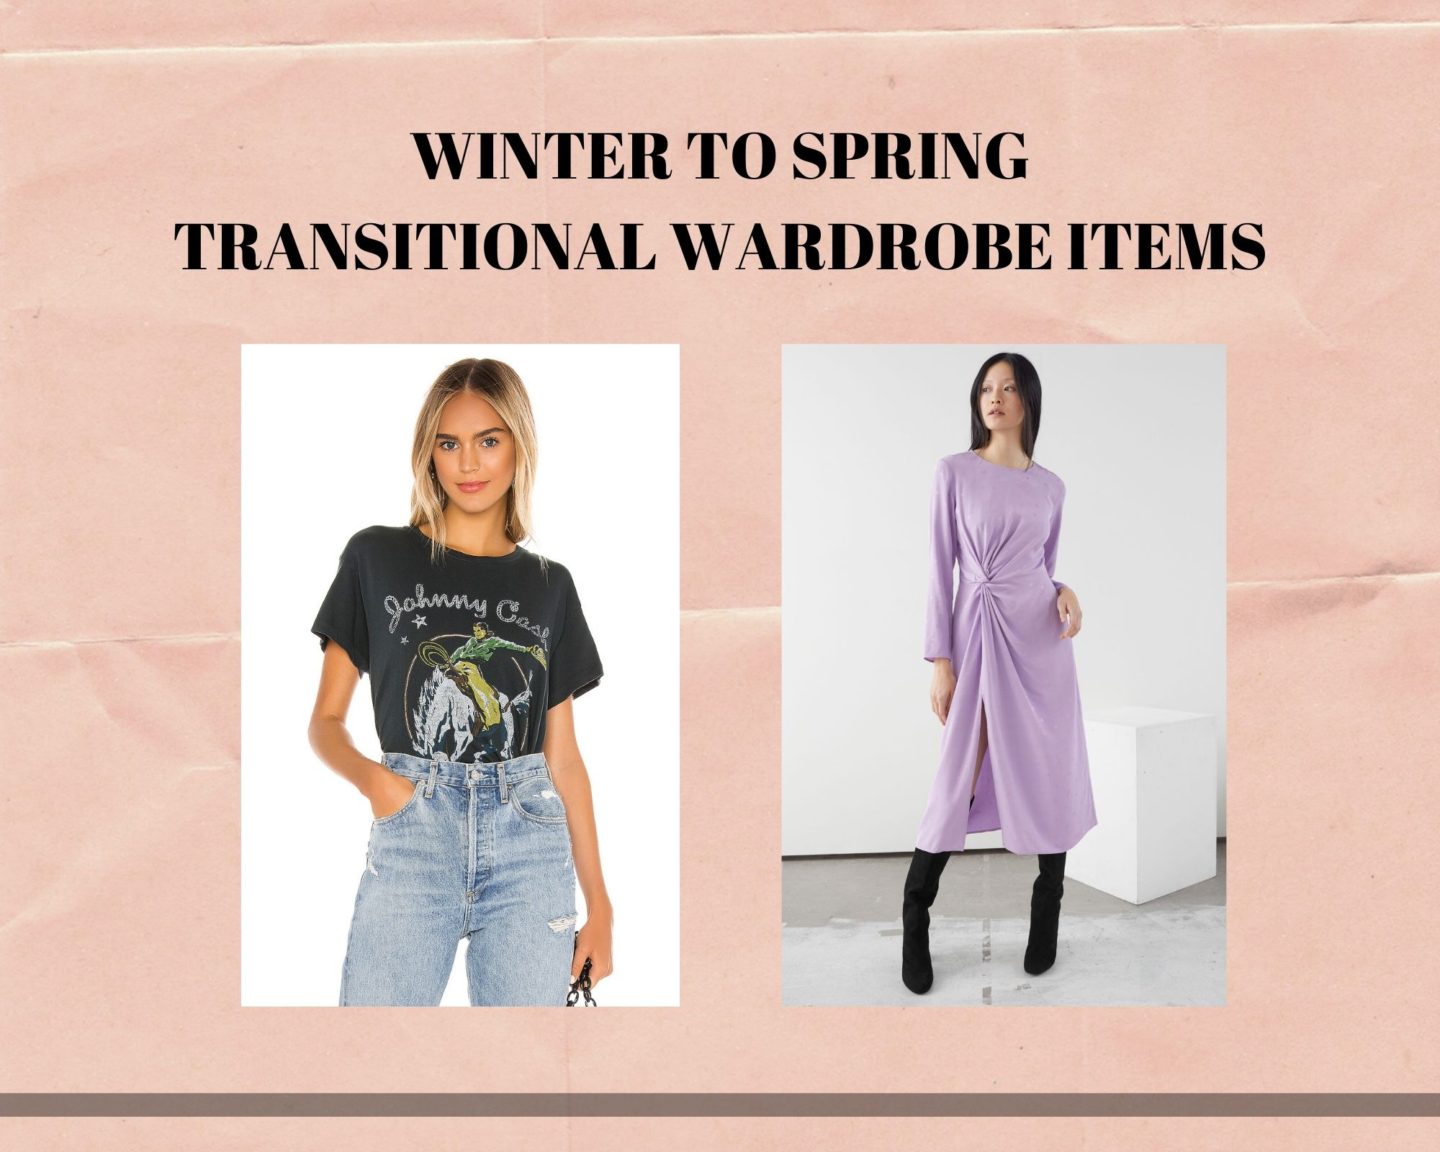 Winter to Spring Transitional Wardrobe Items